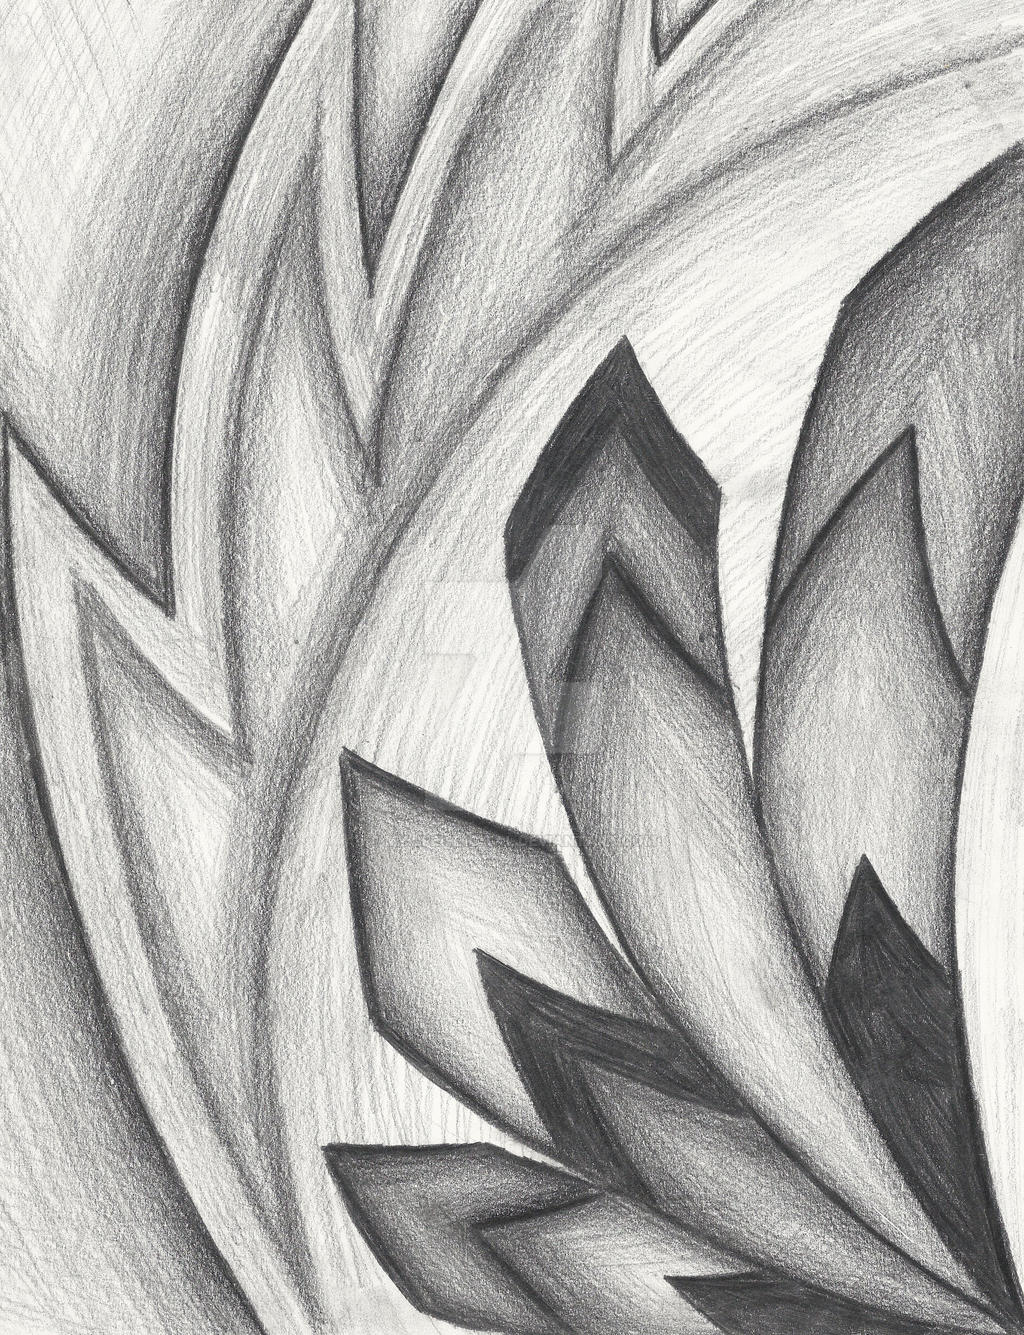 Abstract Drawing 15 by mylifeisdigital on DeviantArt